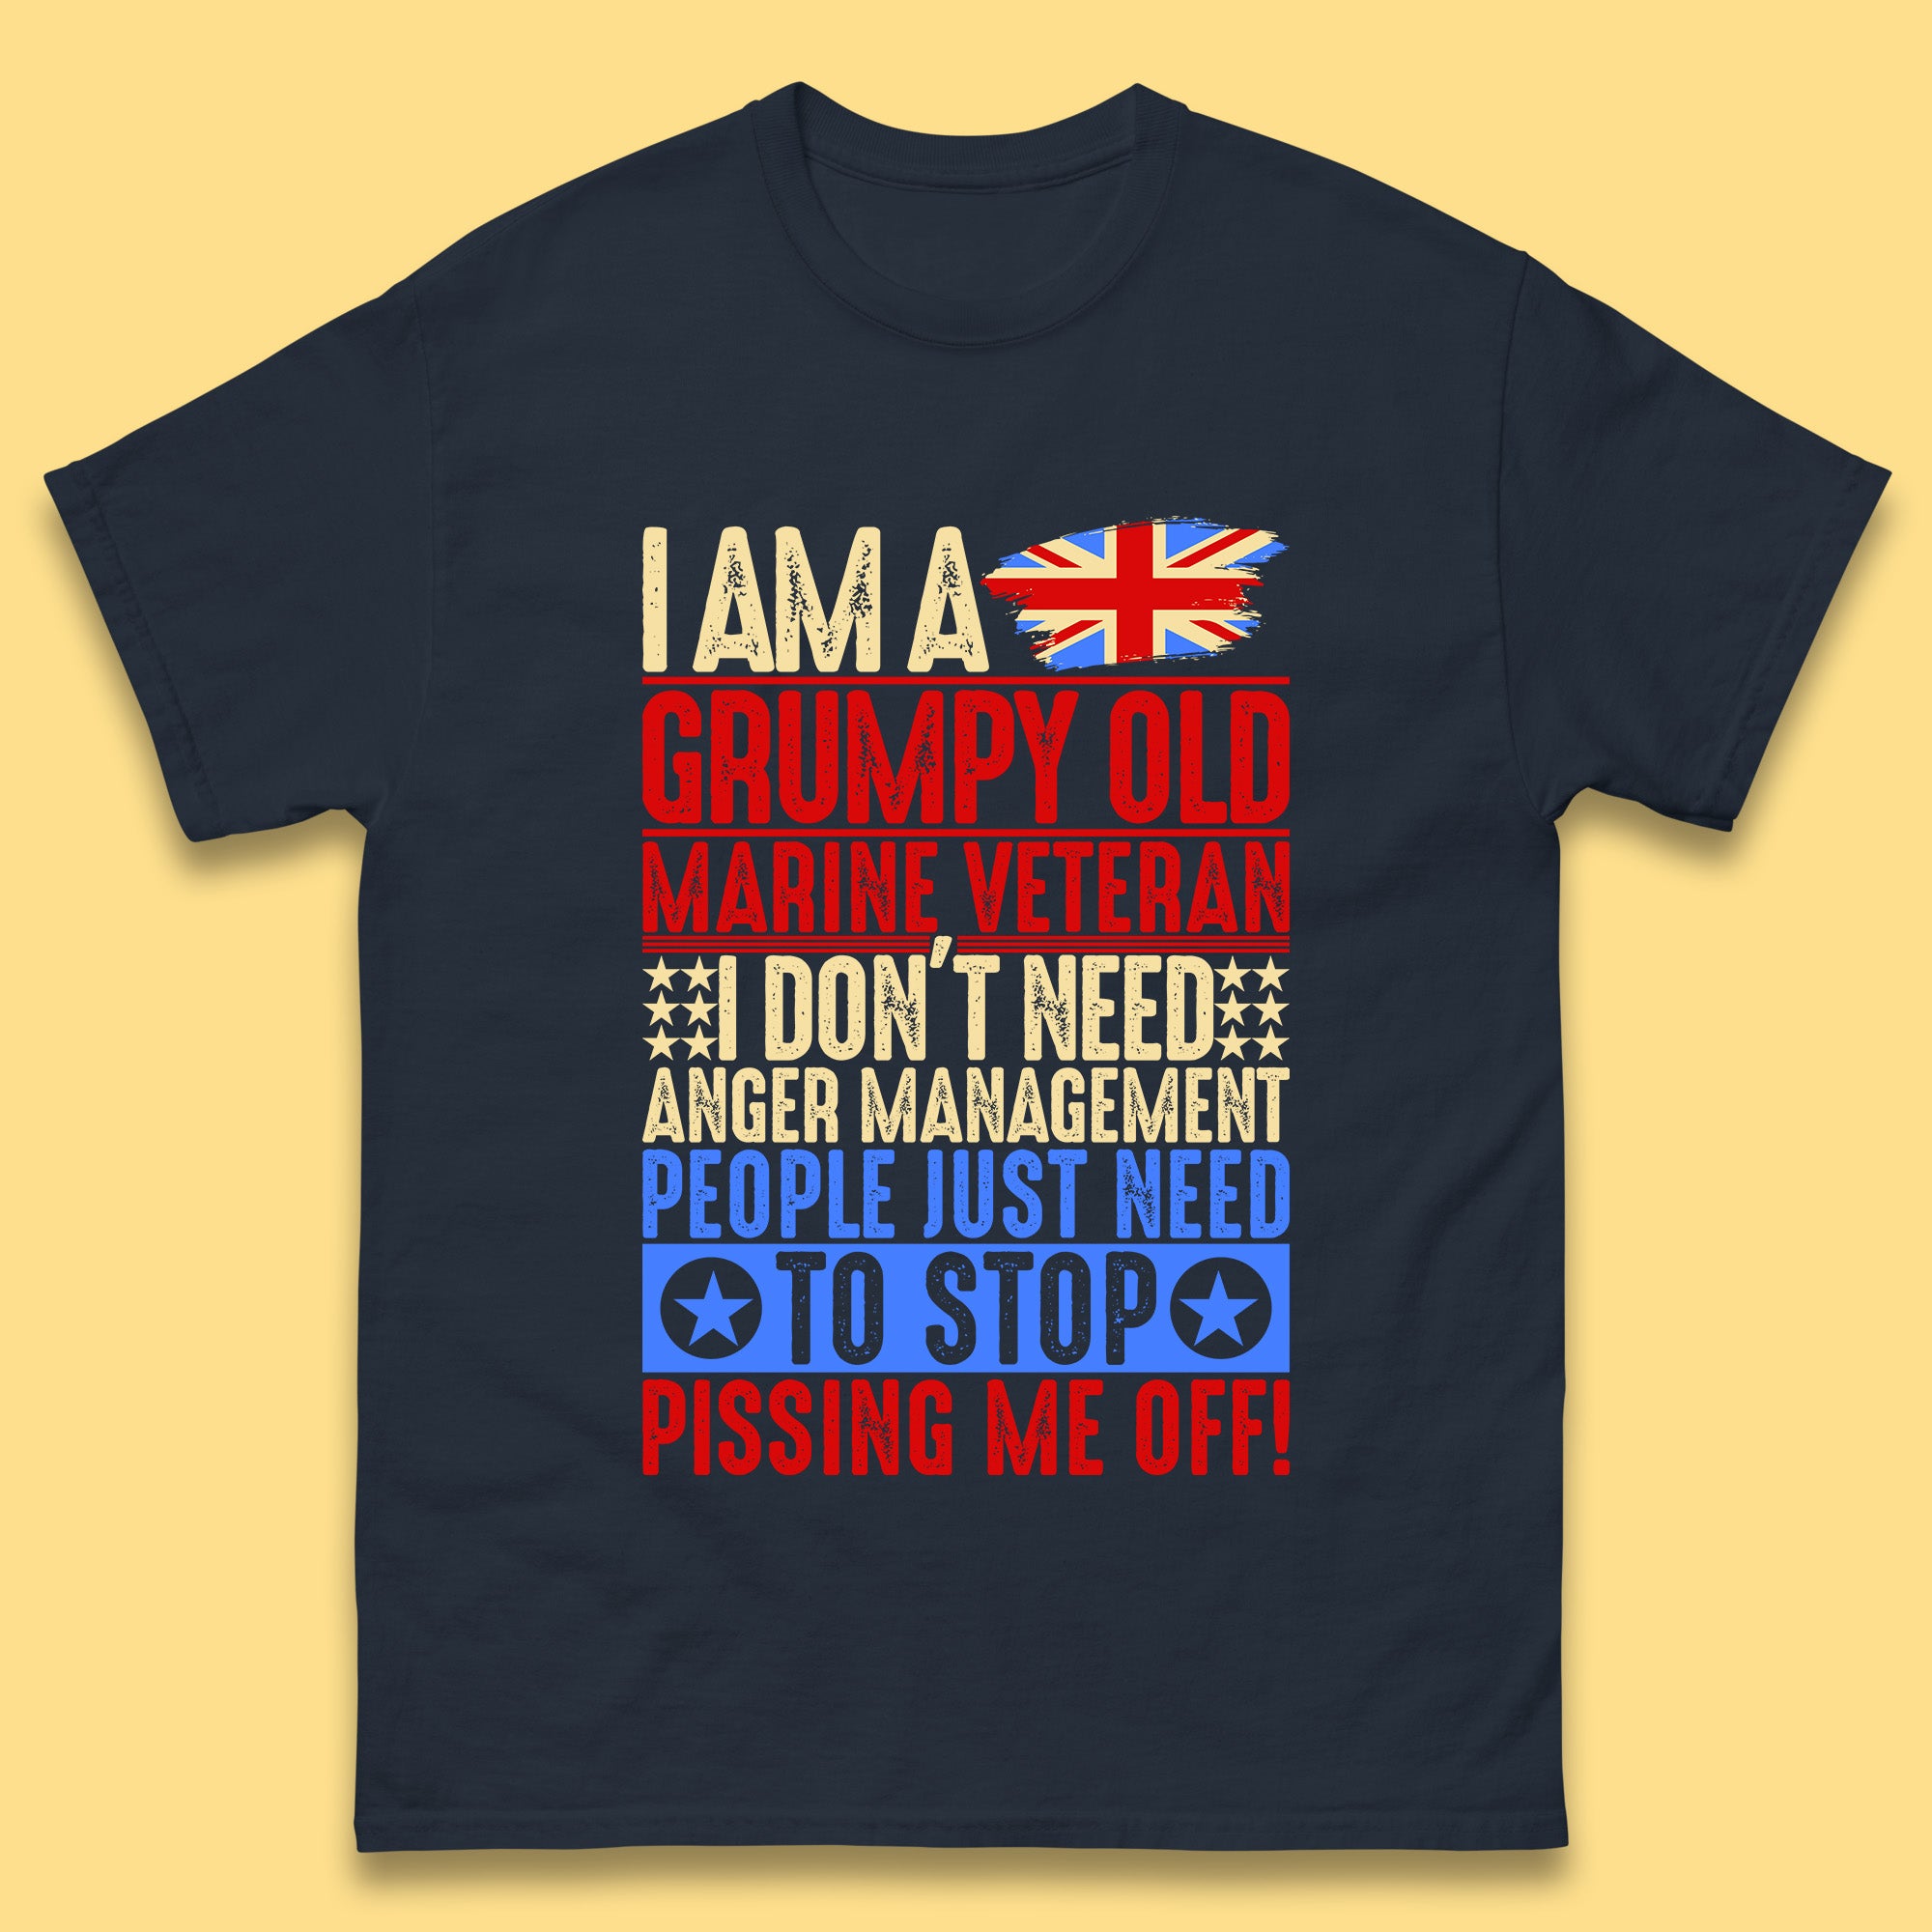 I Am A Grumpy Old Marine Veteran I Don't Need Anger Management People Just Need To Stop Pissing Me Off Funny Remembrance Day Mens Tee Top